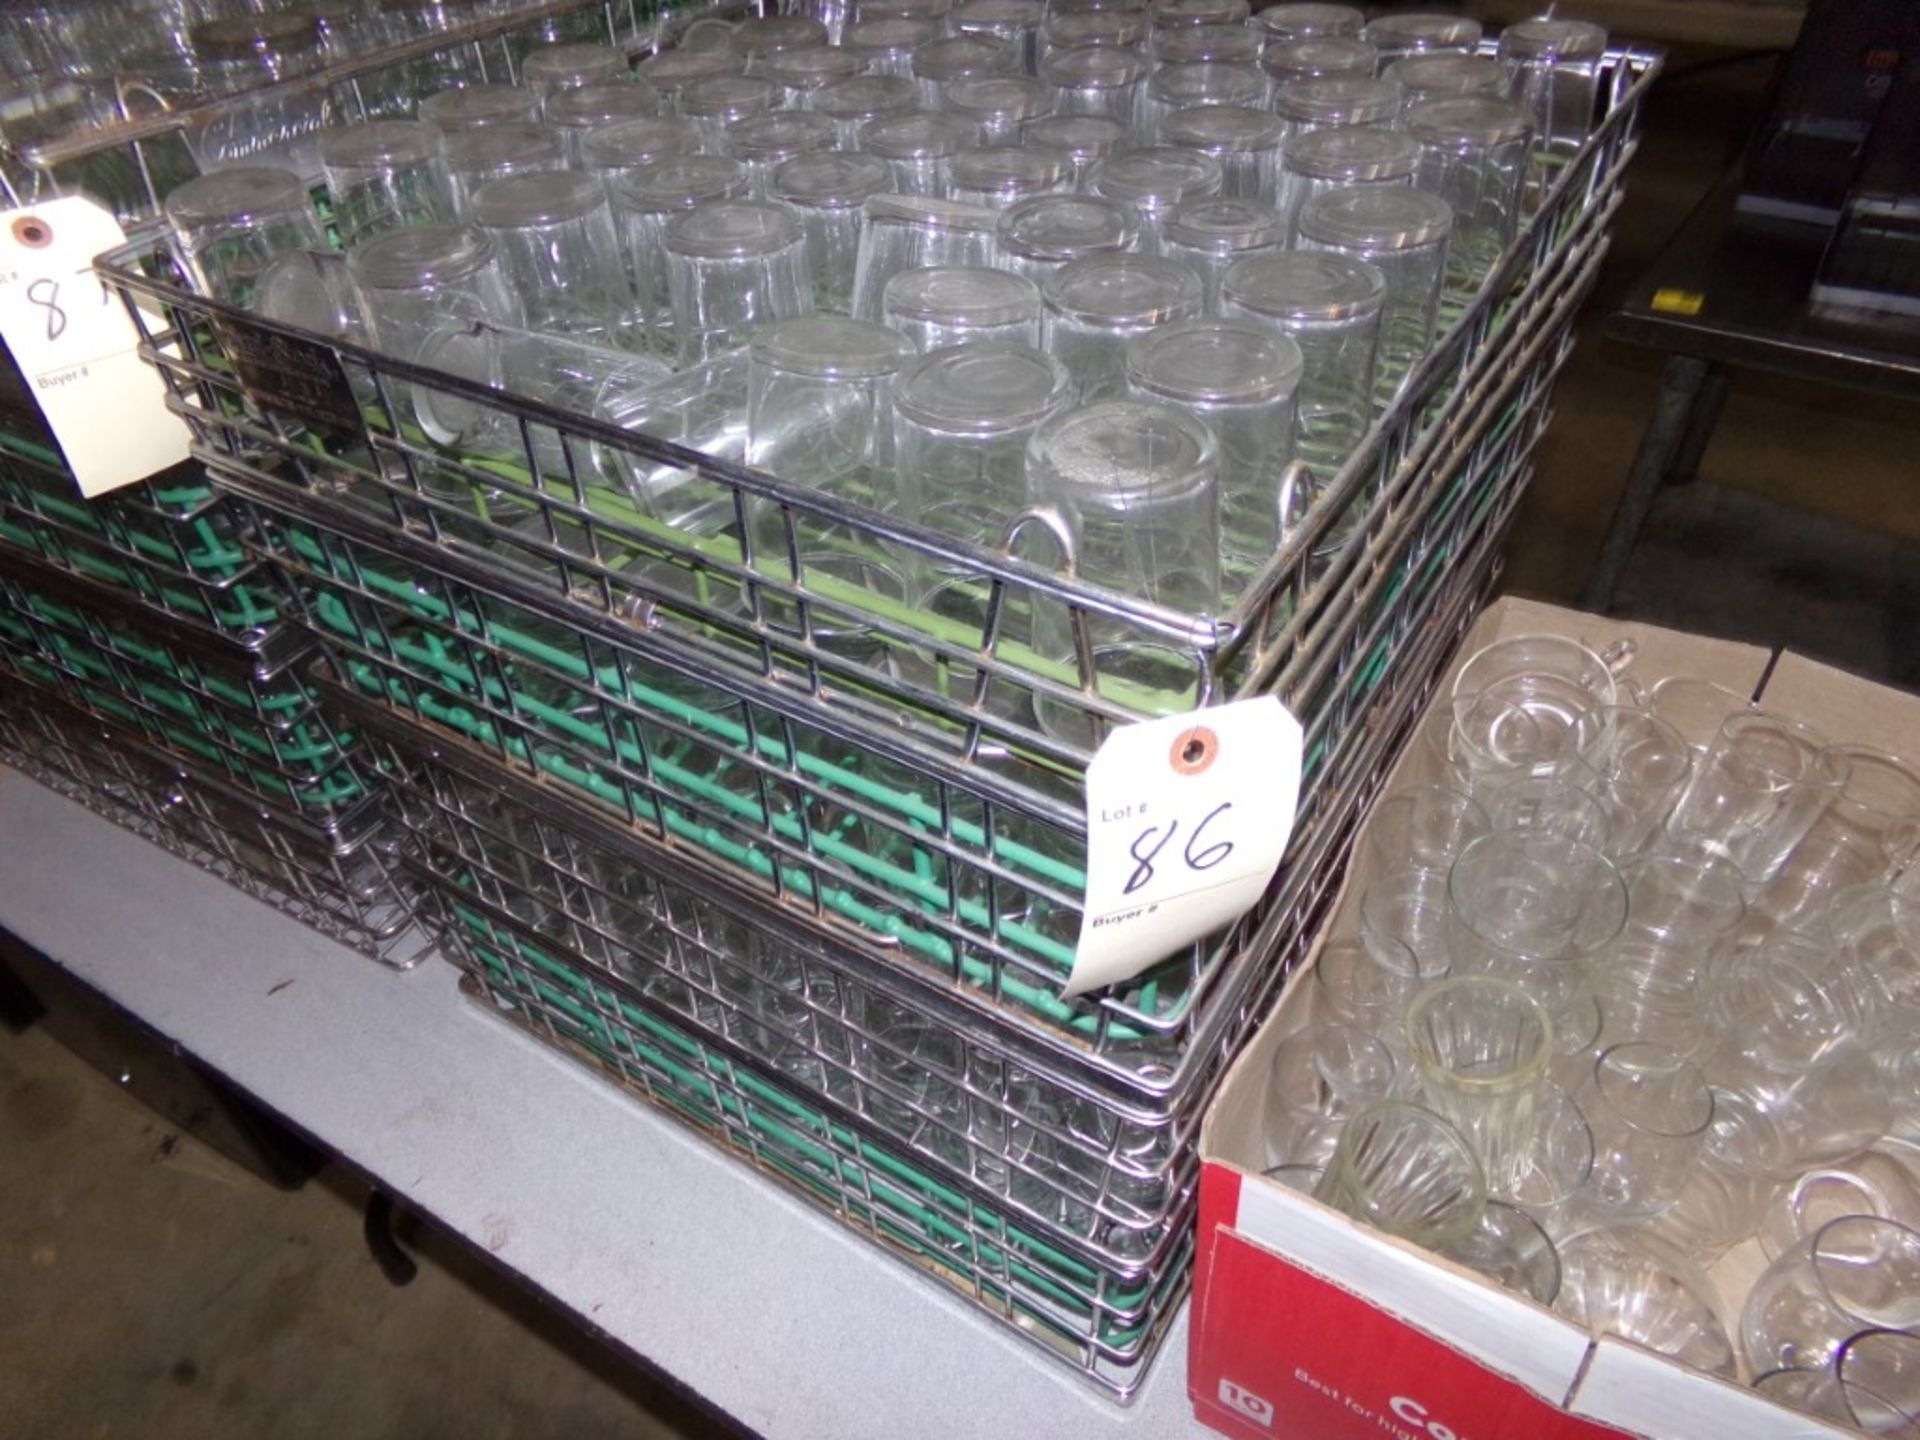 (4) Disc Washer Trays of Juice and Water Glasses